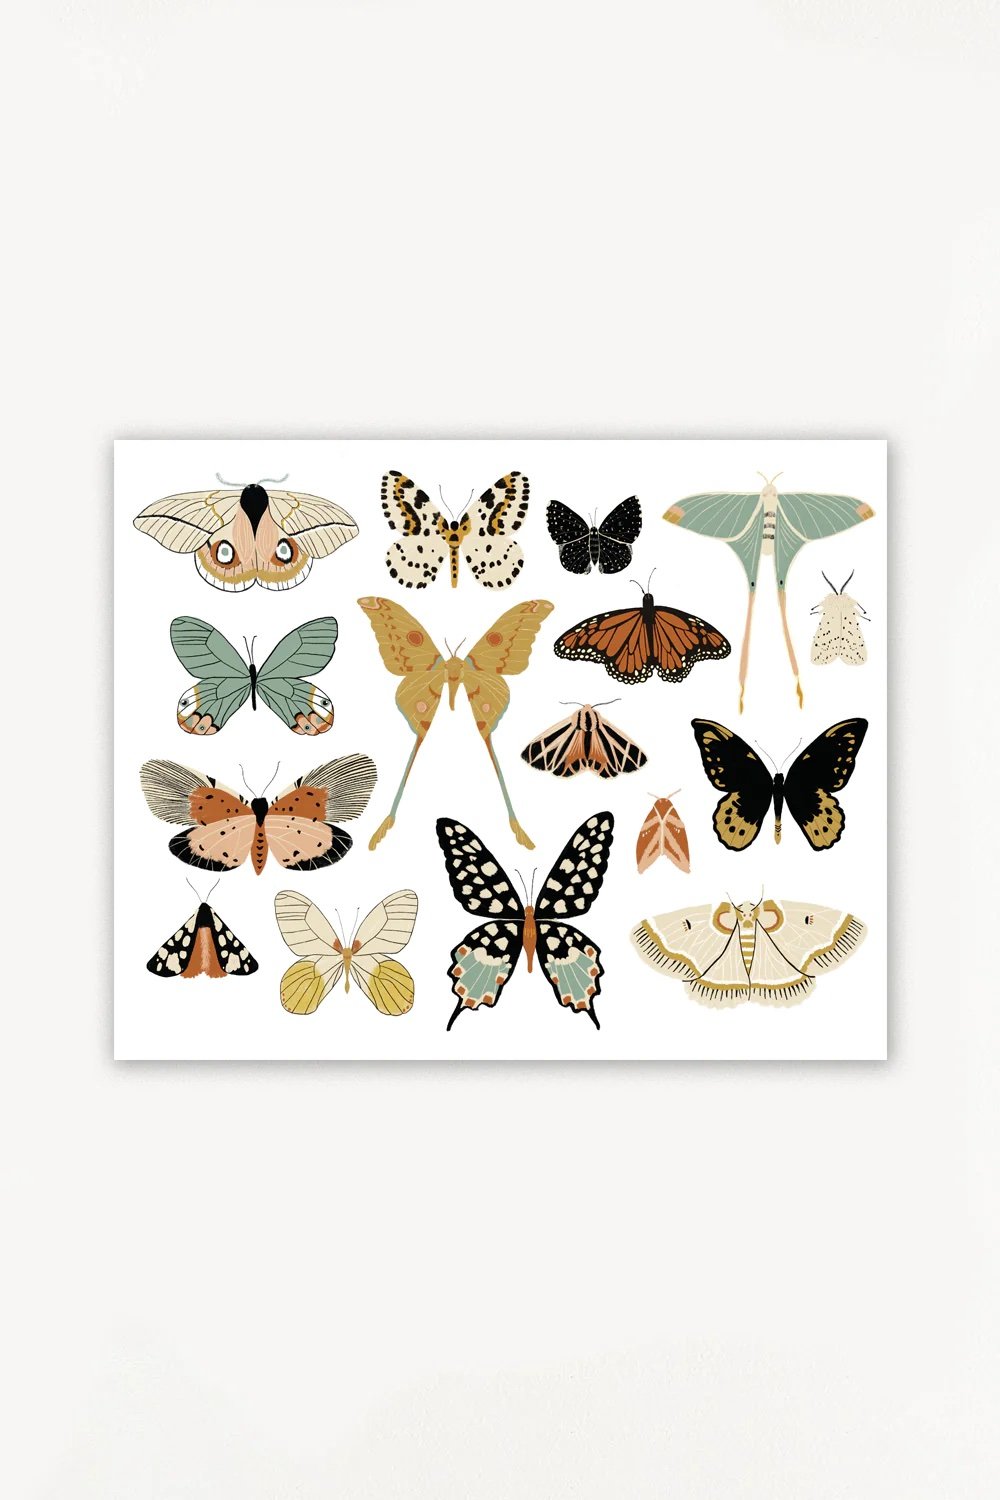 Clementine Kids - Starting at $24 - Butterfly Collector Art